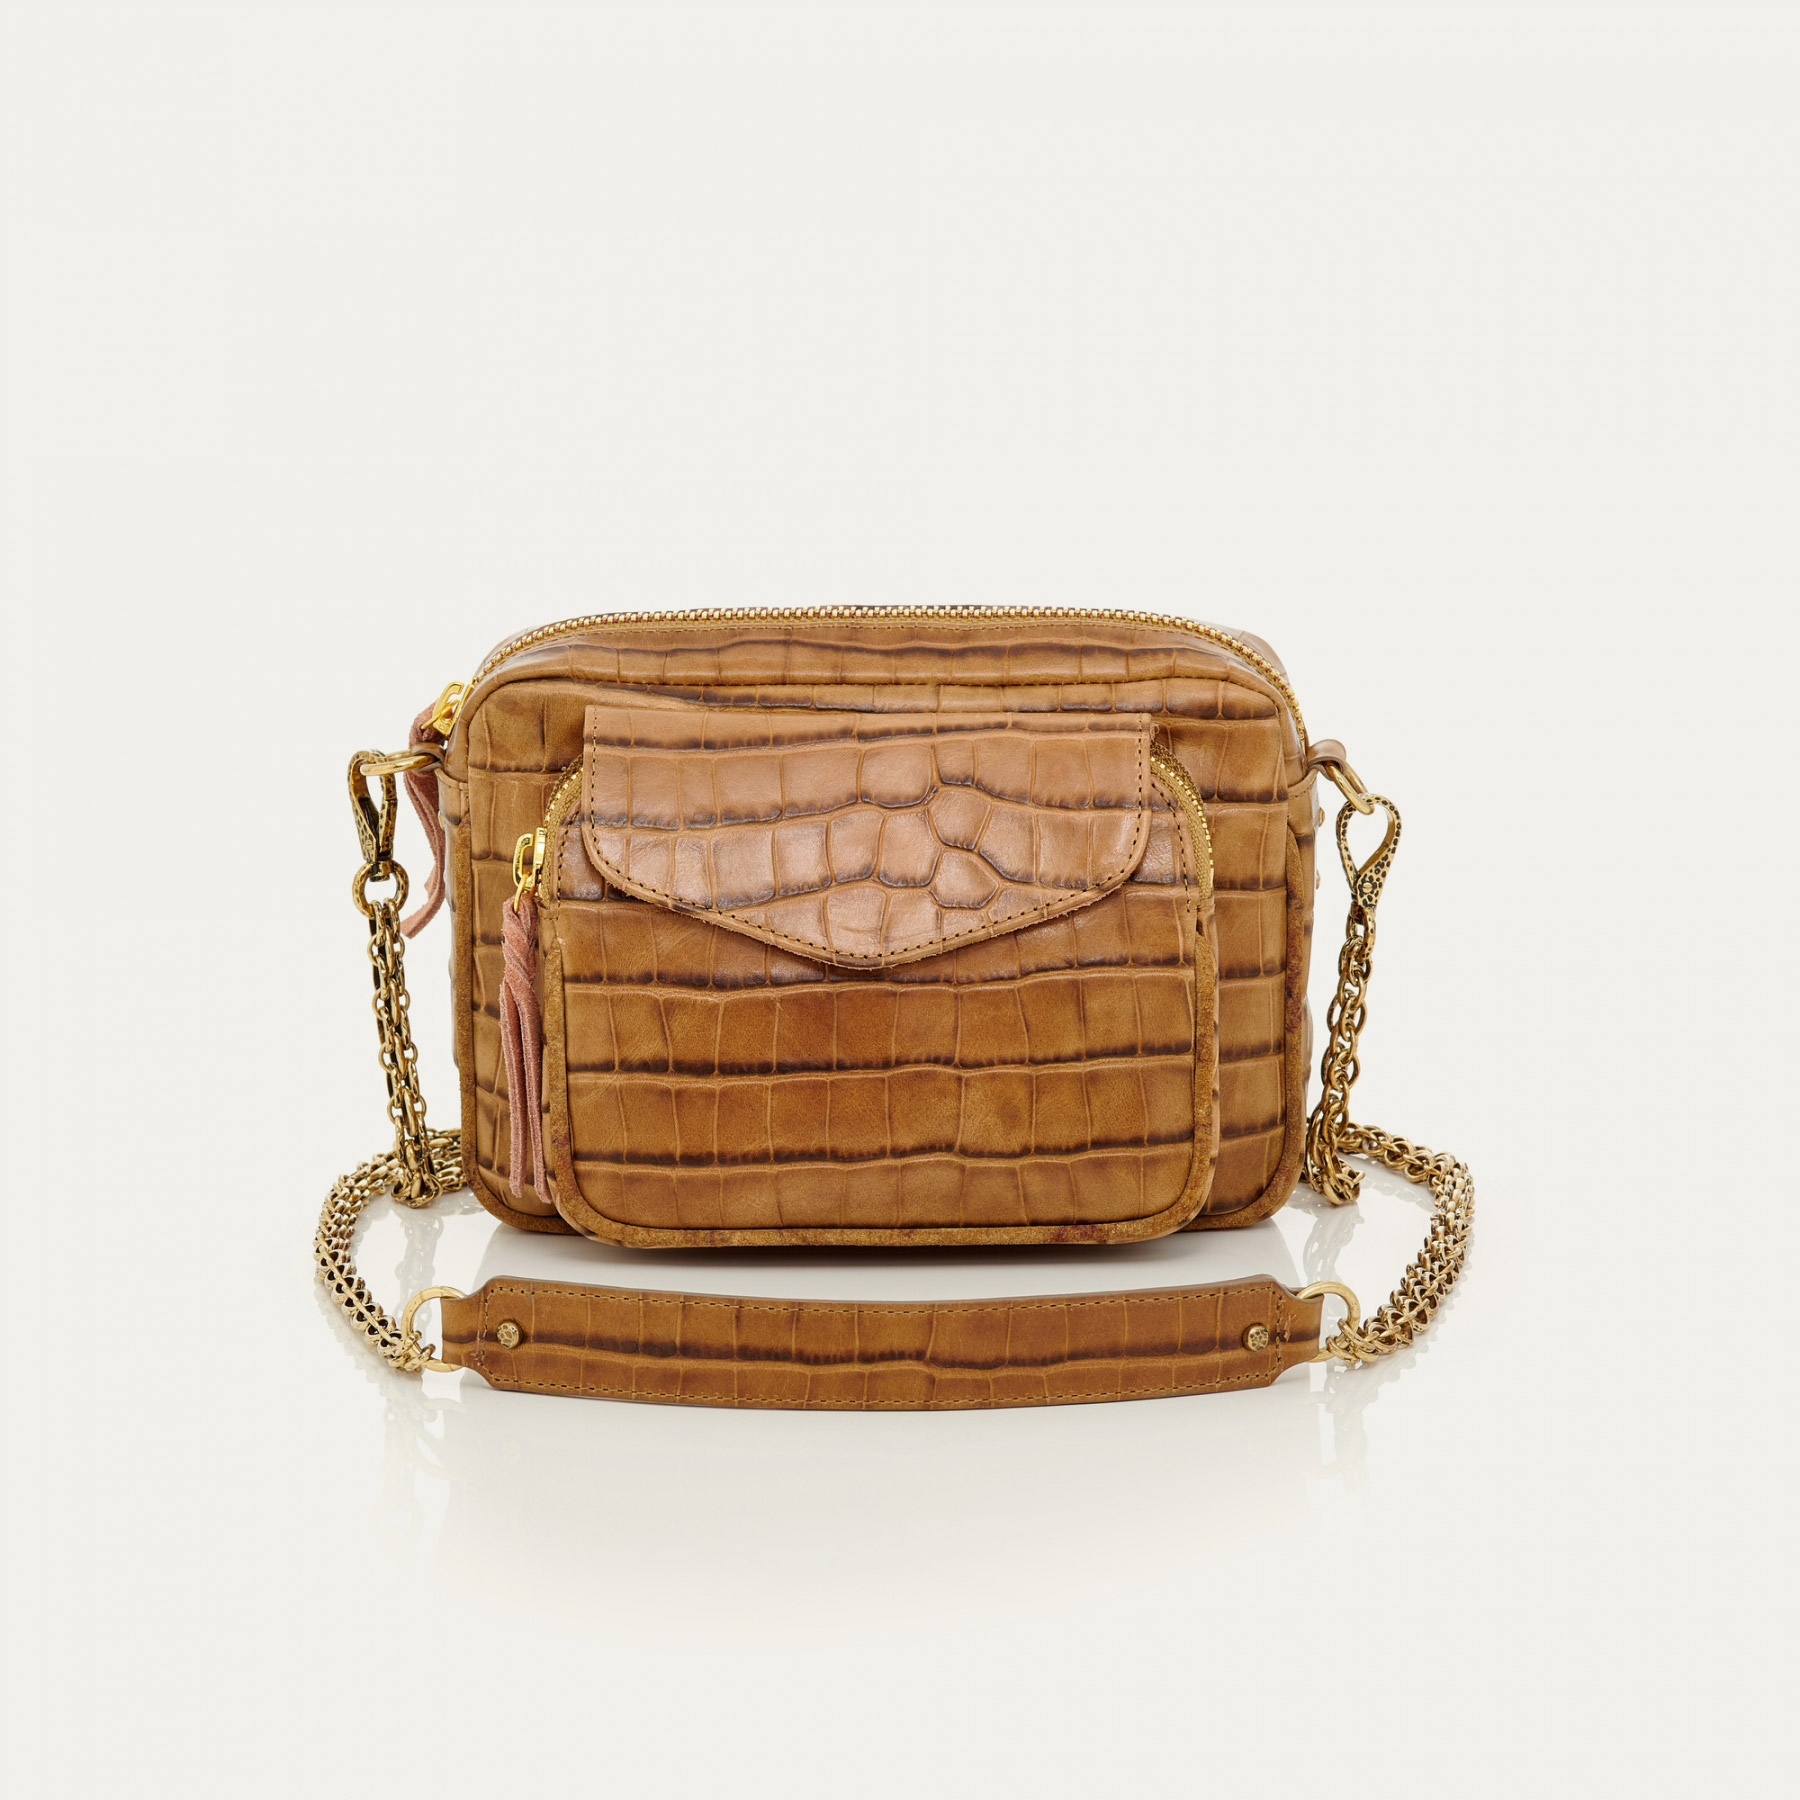 Claris Virot Tobacco Leather Charly Bag